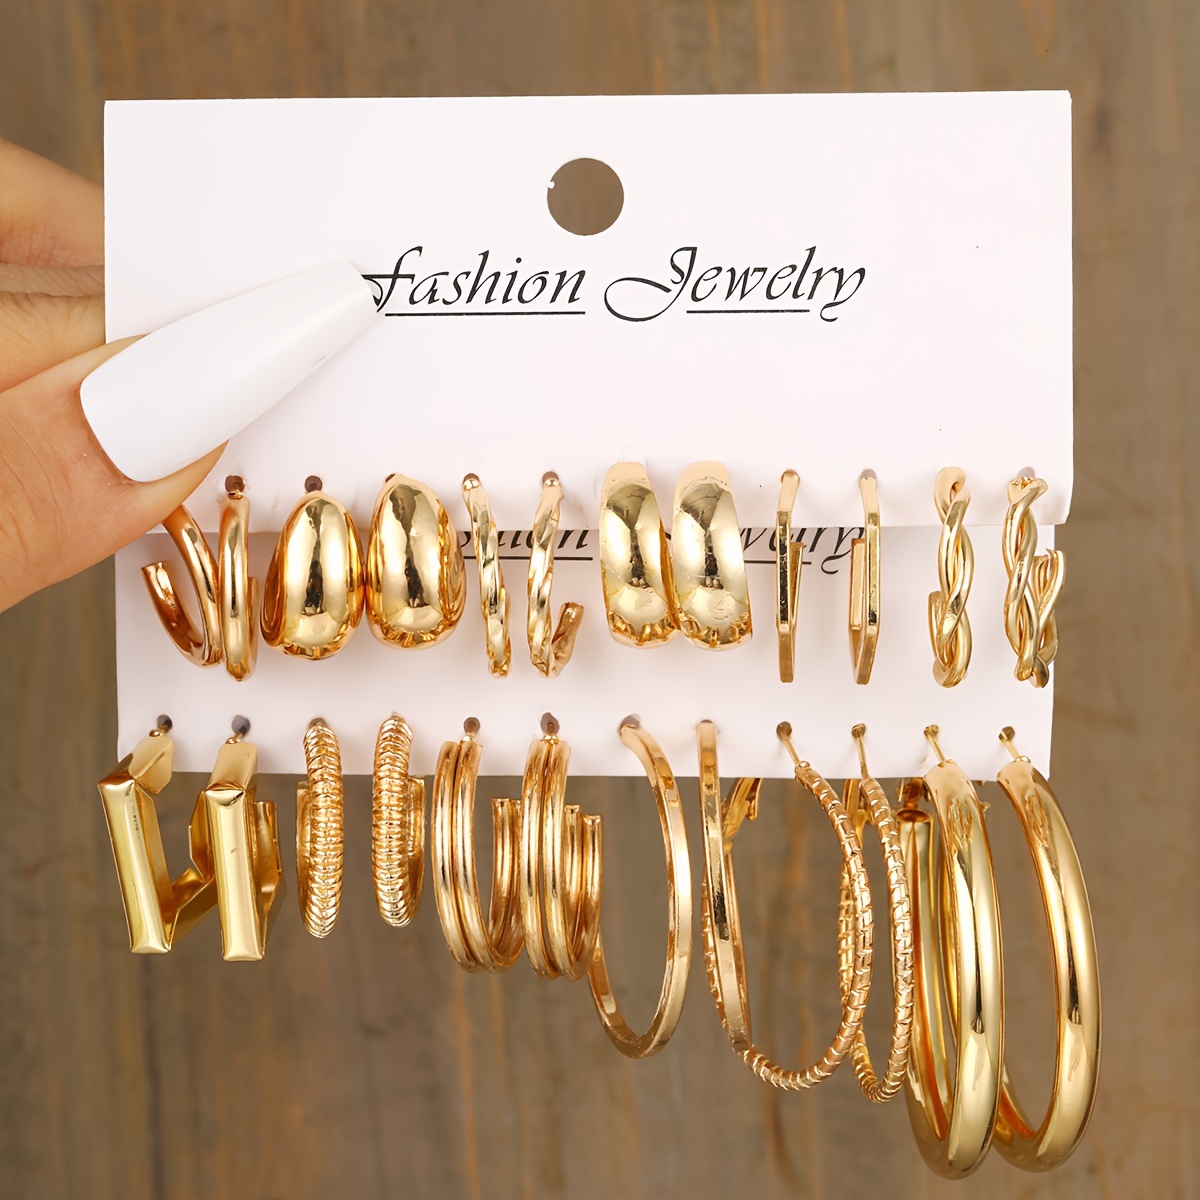 

12 Pairs Set Of Delicate Hoop Earrings Zinc Alloy Jewelry Simple Elegant Style Big Set Gift For Women Daily Party Earrings